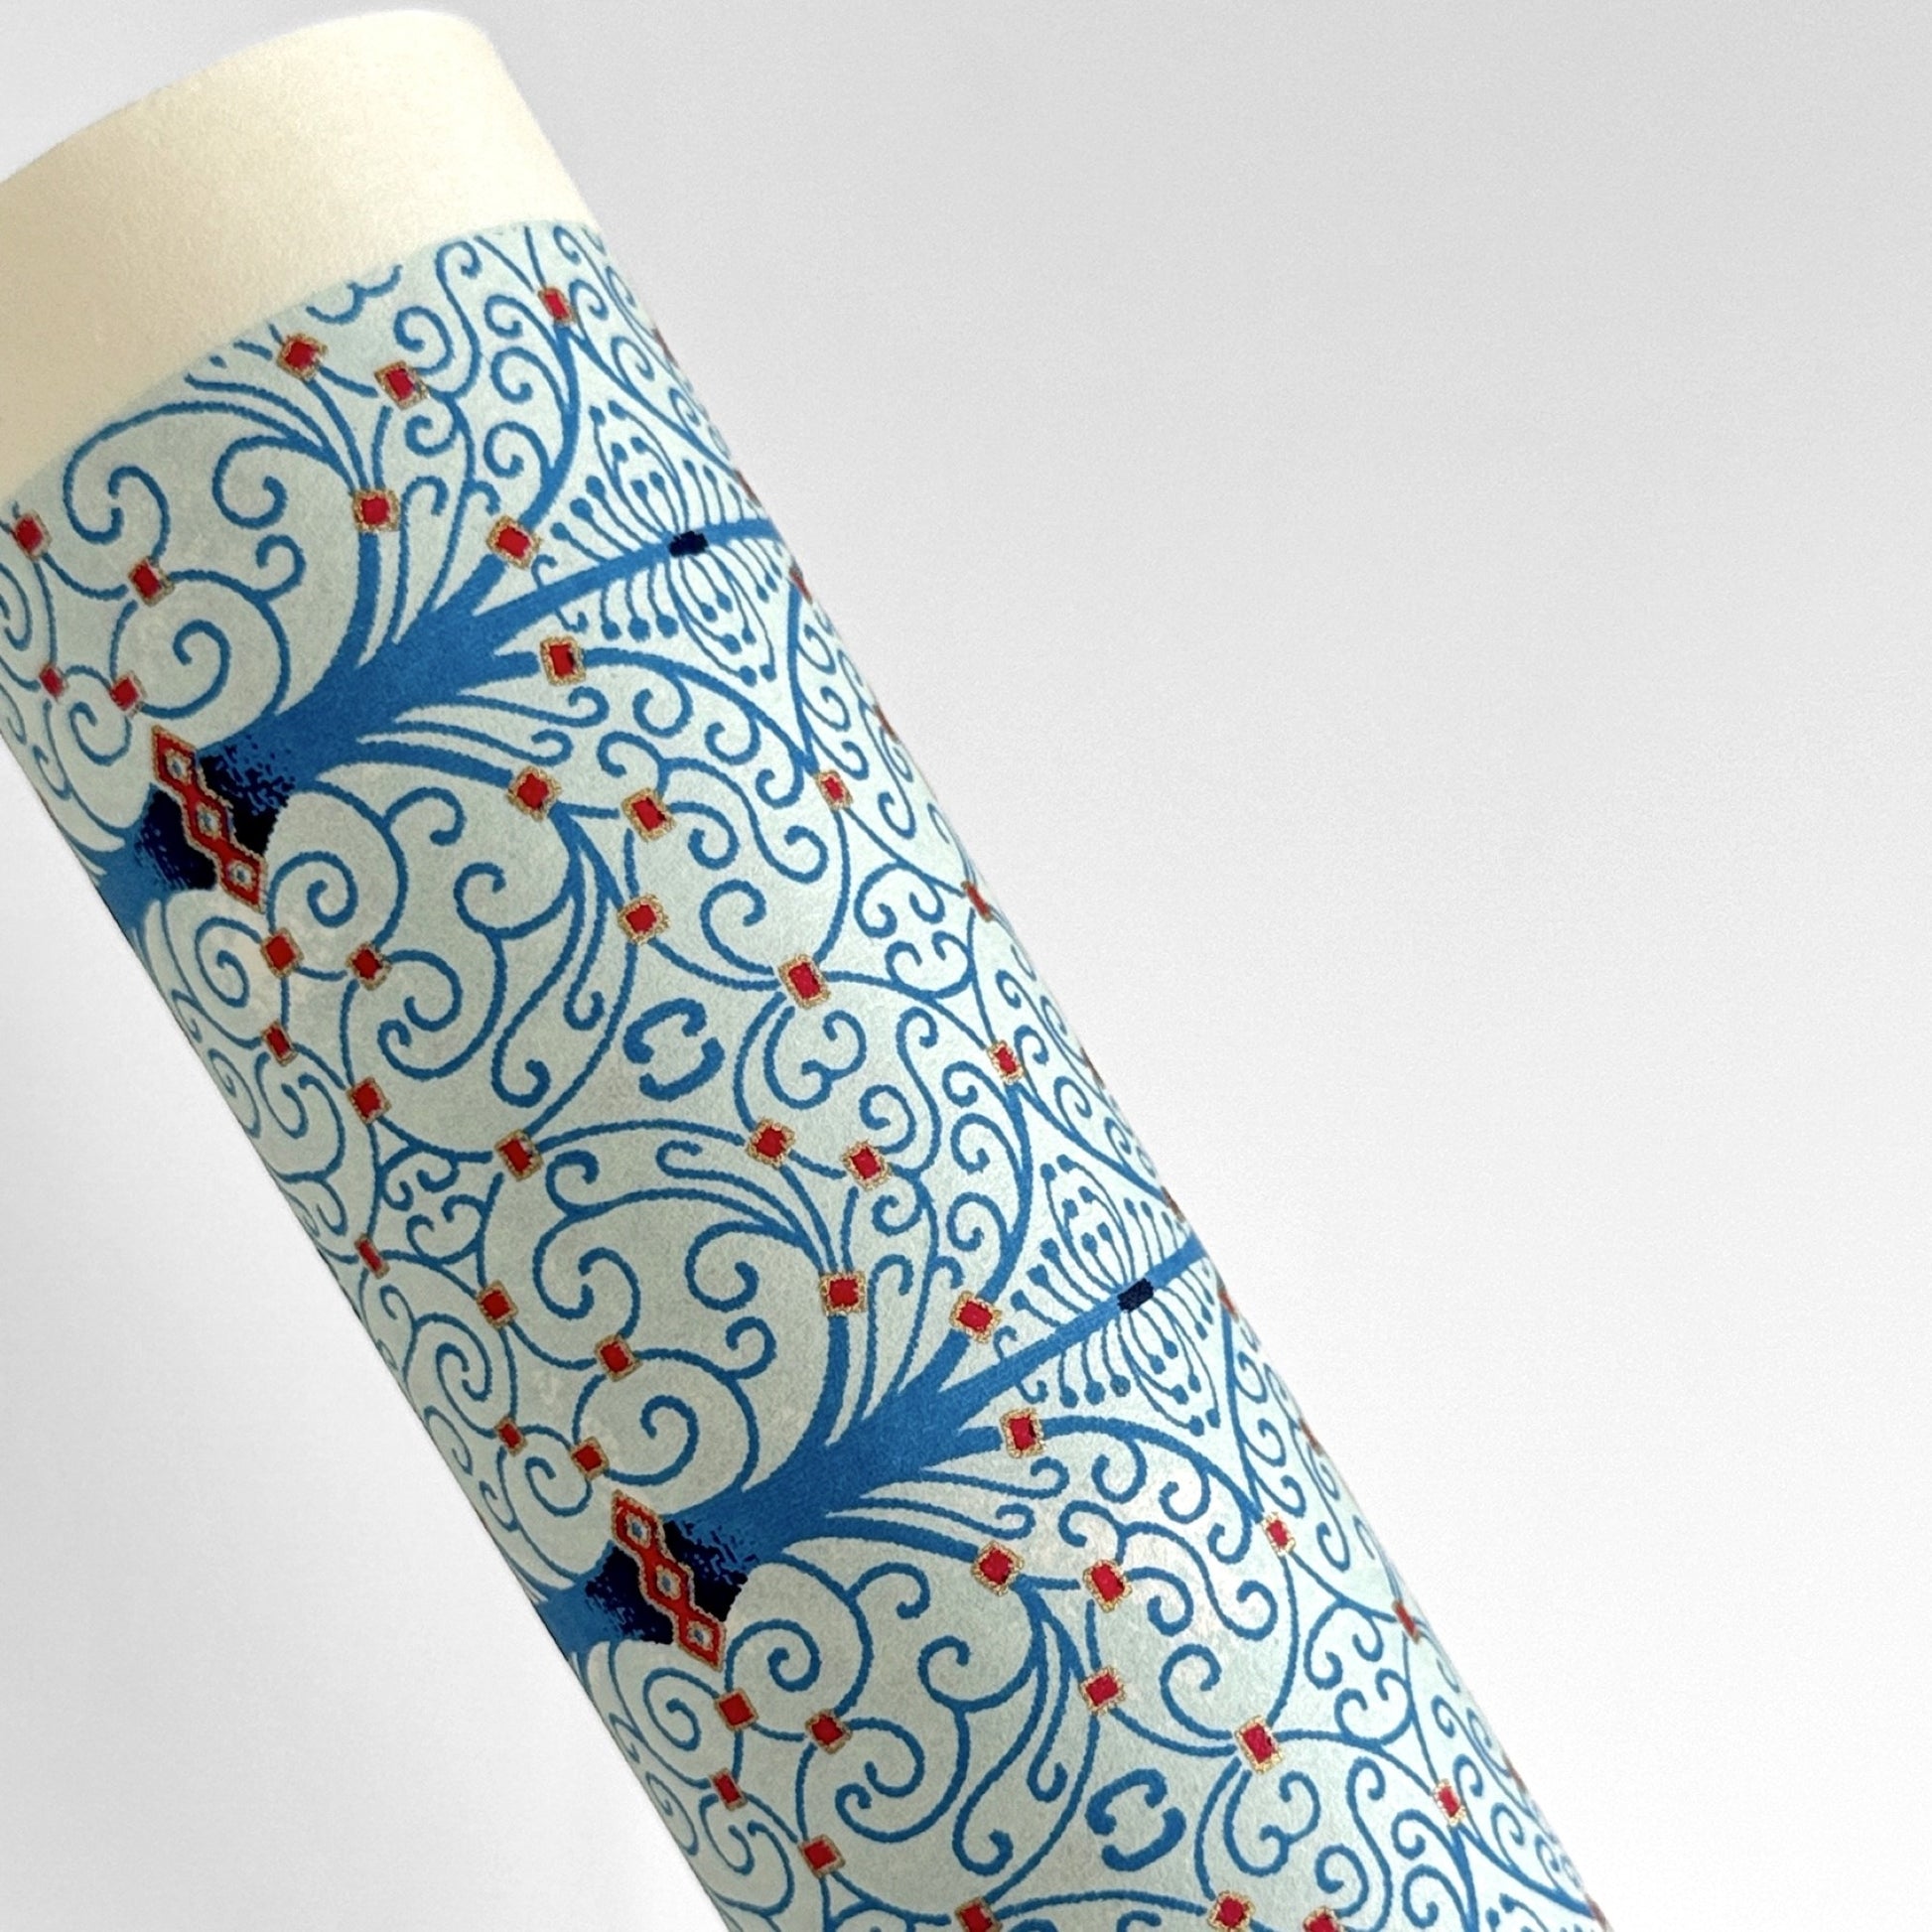 Japanese silkscreen chiyogami paper with a intricate filigree trellis design in blue with red and gold accent. Pictured rolled